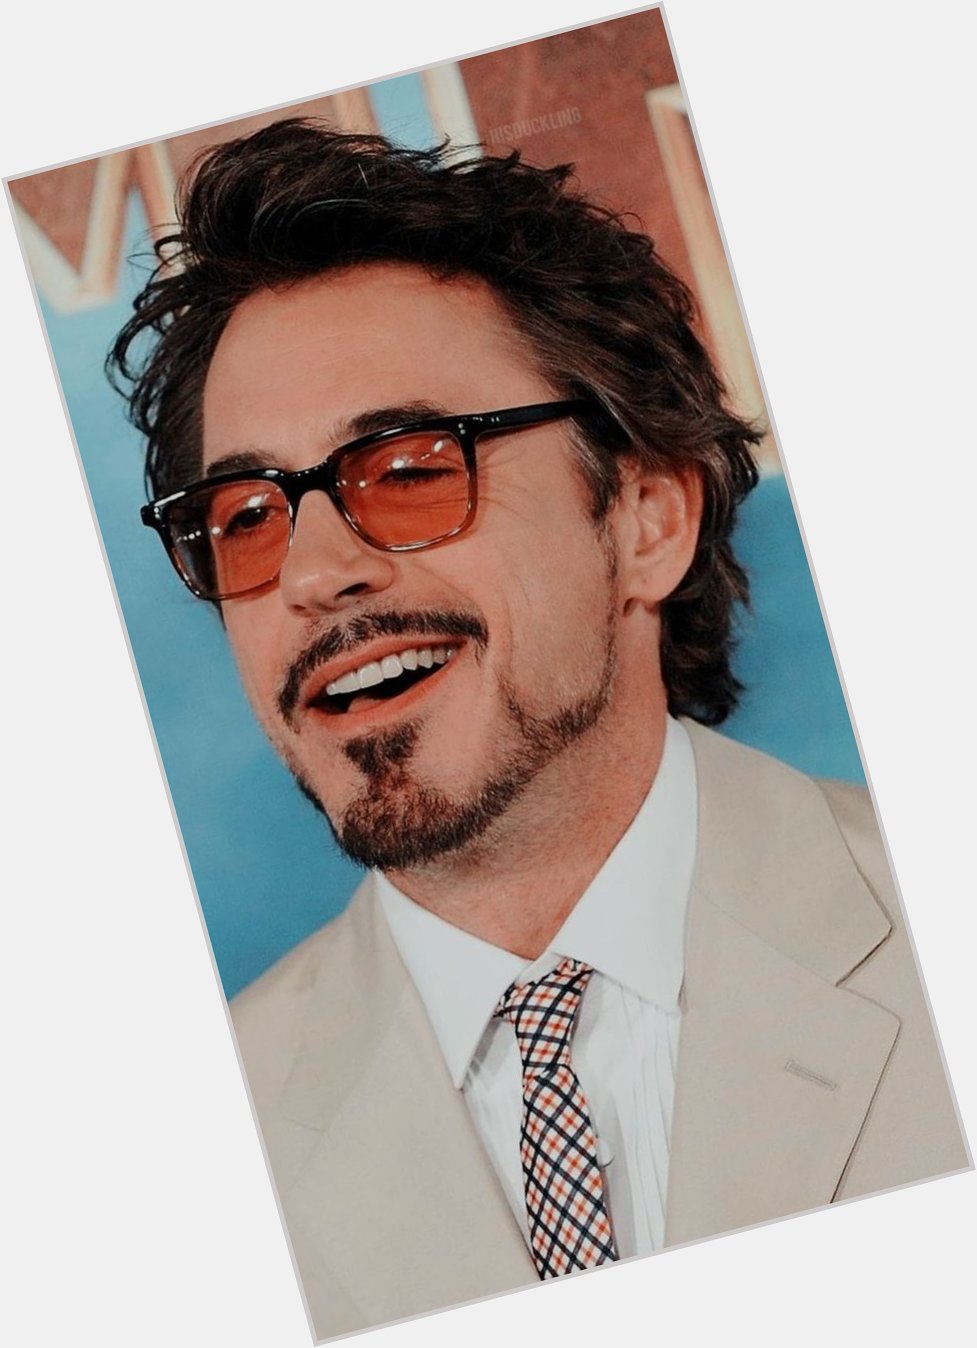 HAPPY BIRTHDAY TO THE MAN WHO TURNED HIS LIFE AROUND AND STARTED IT ALL ! MISTER ROBEDOWNEY JR 